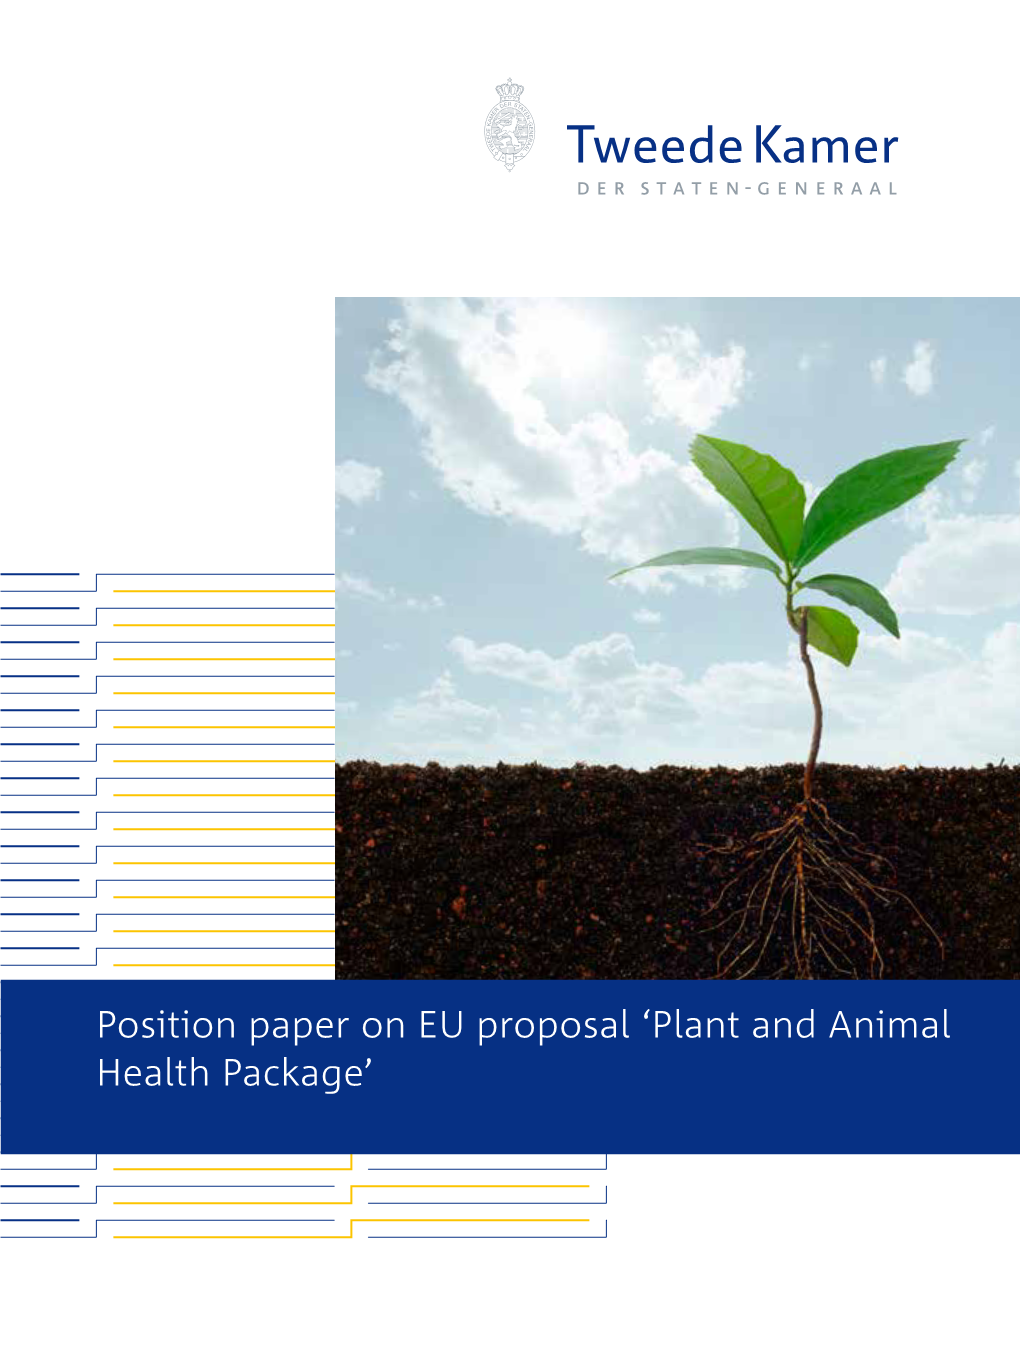 Position Paper on EU Proposal 'Plant and Animal Health Package'